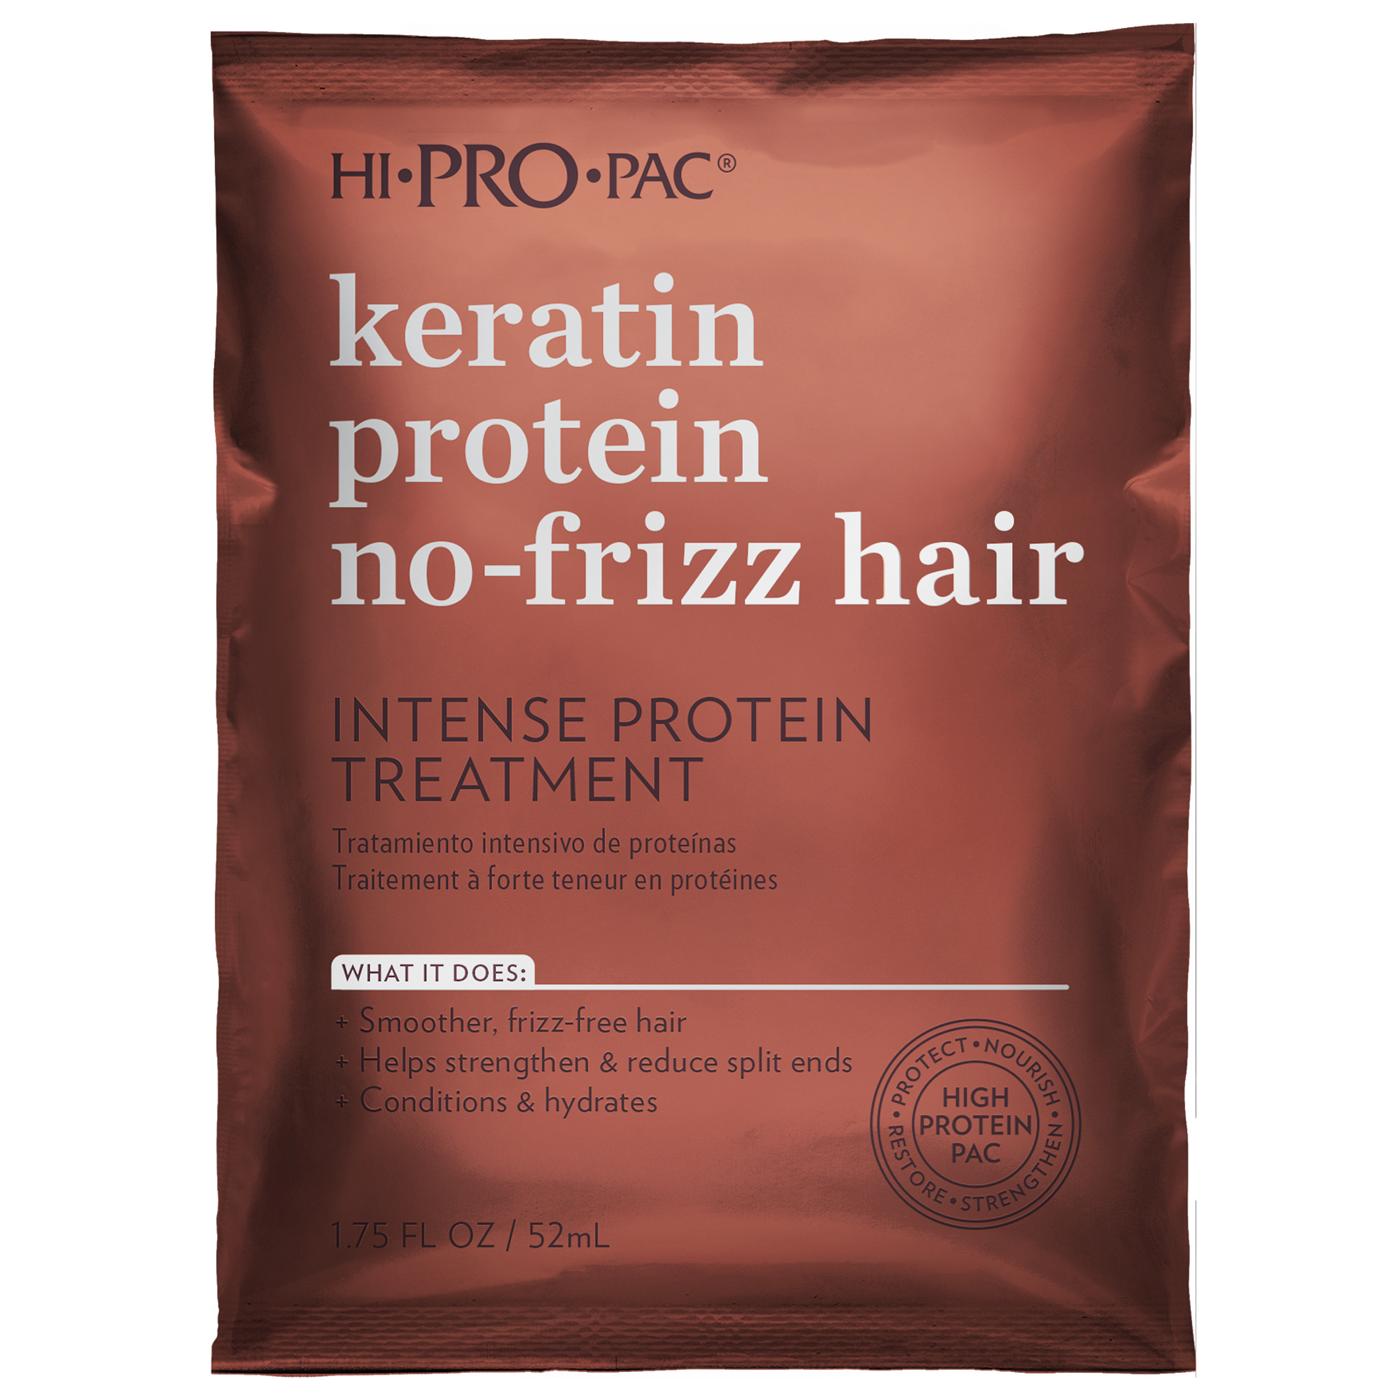 Hi Pro Pac Keratin Protein No-Frizz Hair Intense Protein Treatment; image 1 of 2